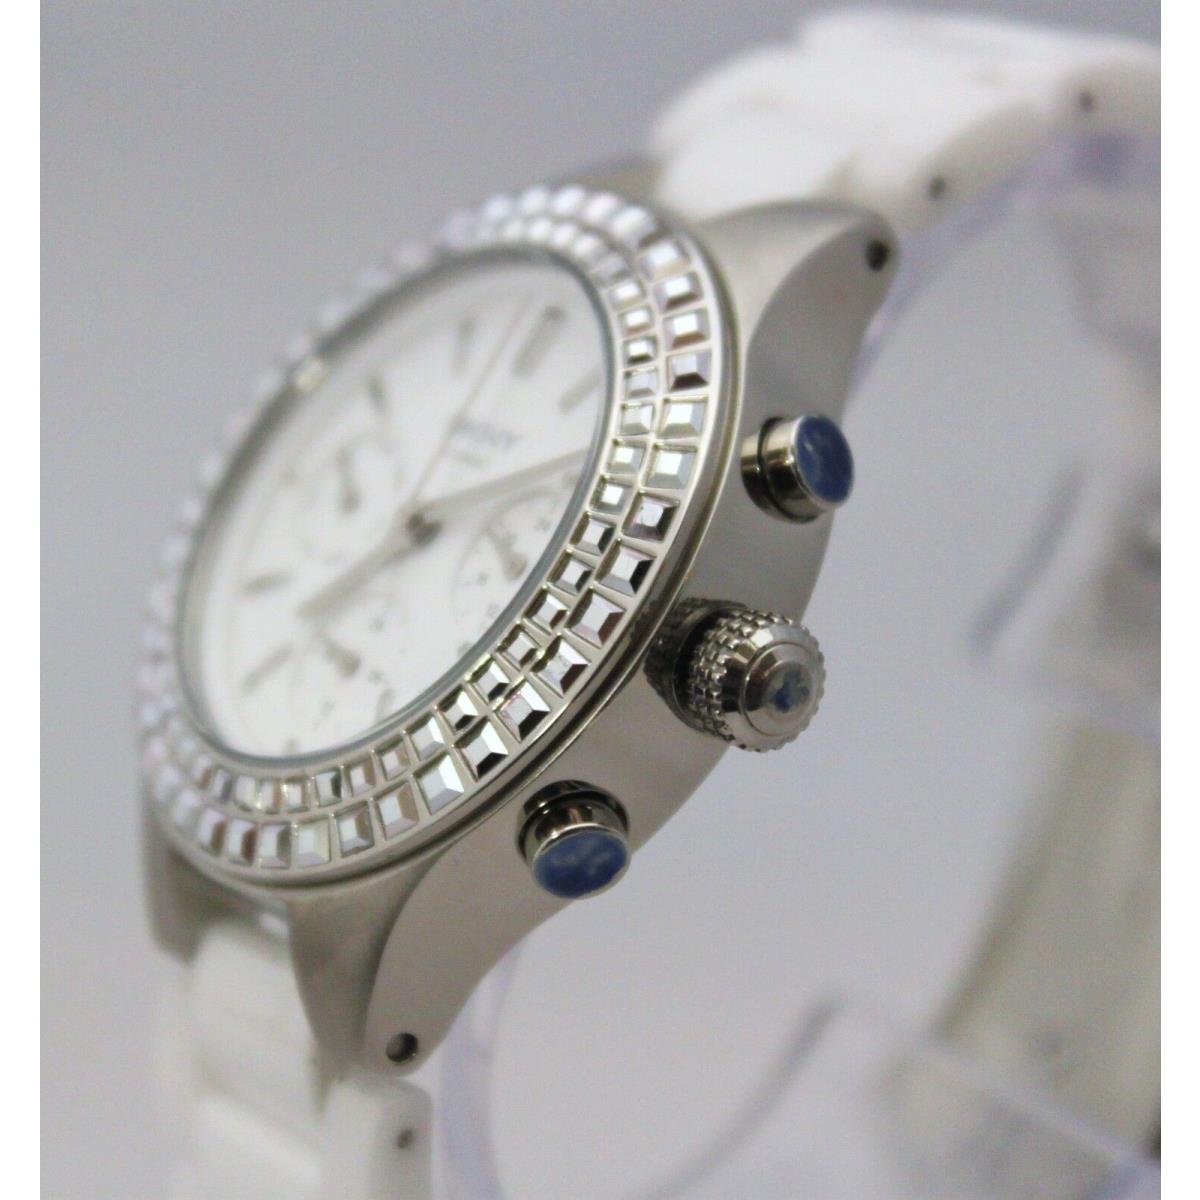 DKNY watch  - White Face, White Dial, White Band